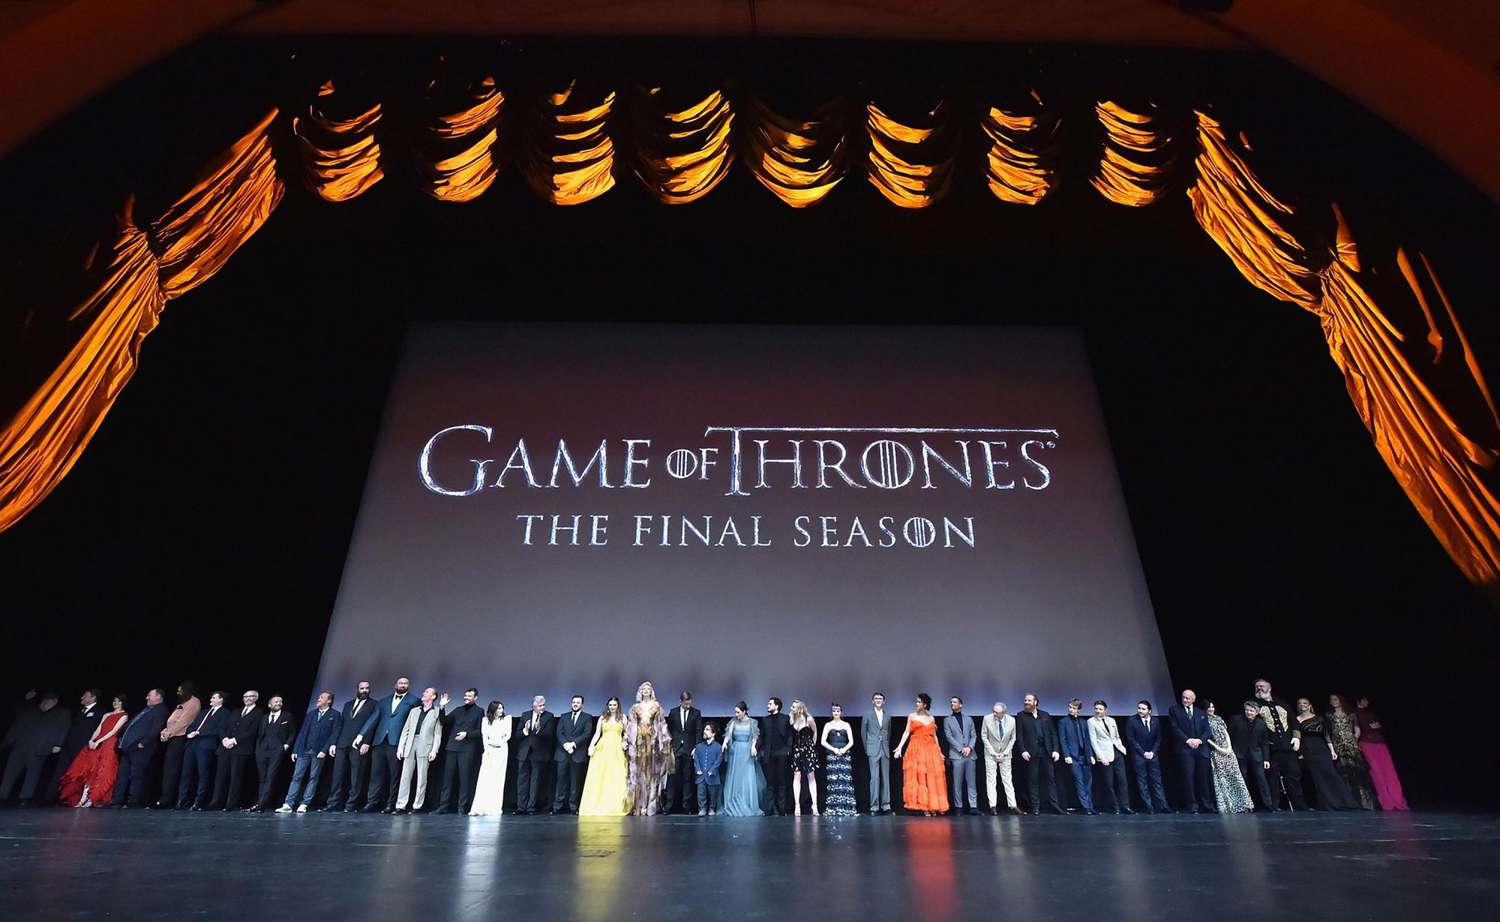 The Game Of Thrones cast